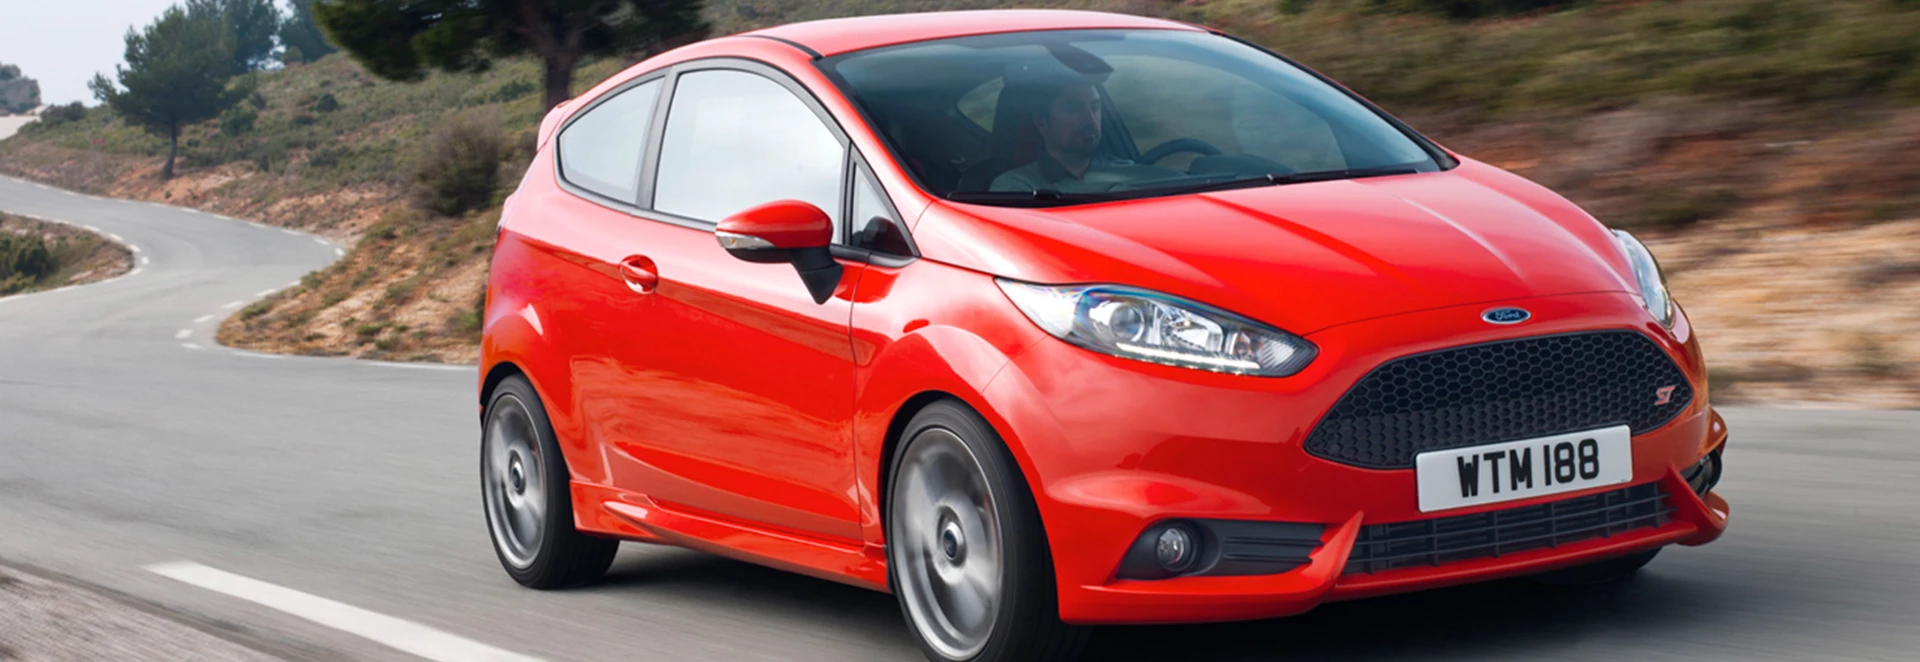 Fast small cars: our 5 best small cars on the market 